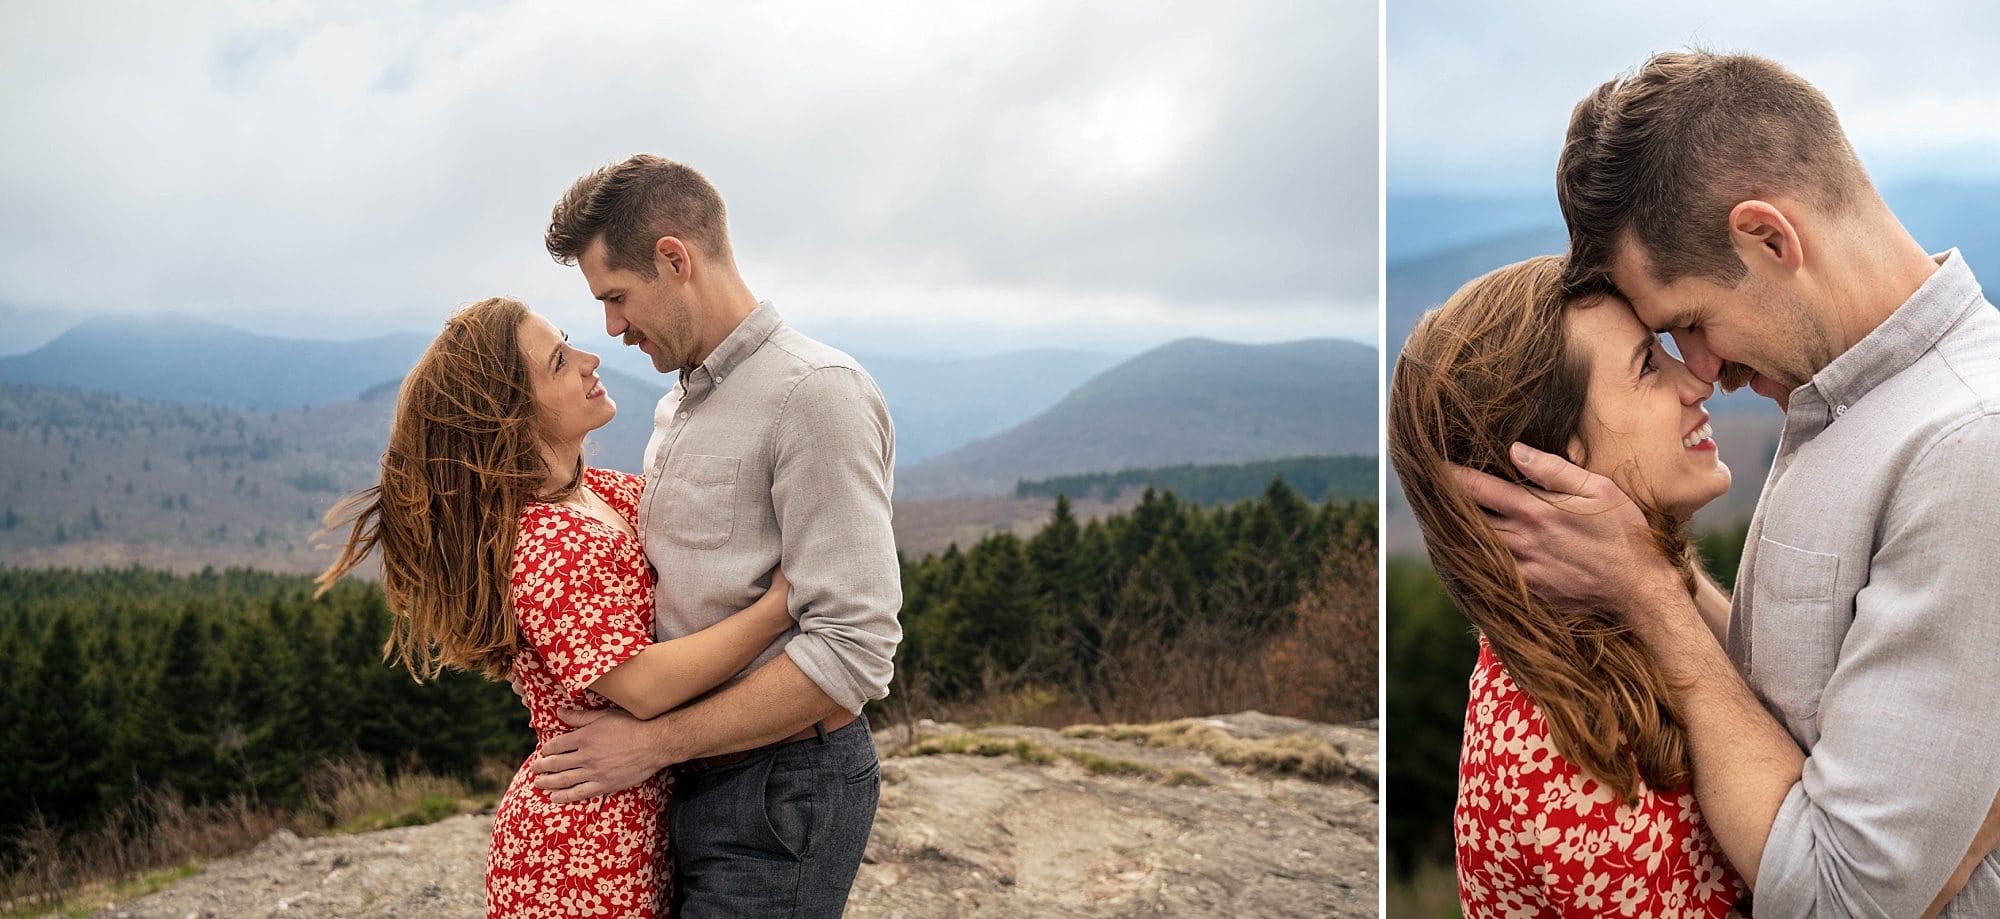 tips to make the most of your engagement session